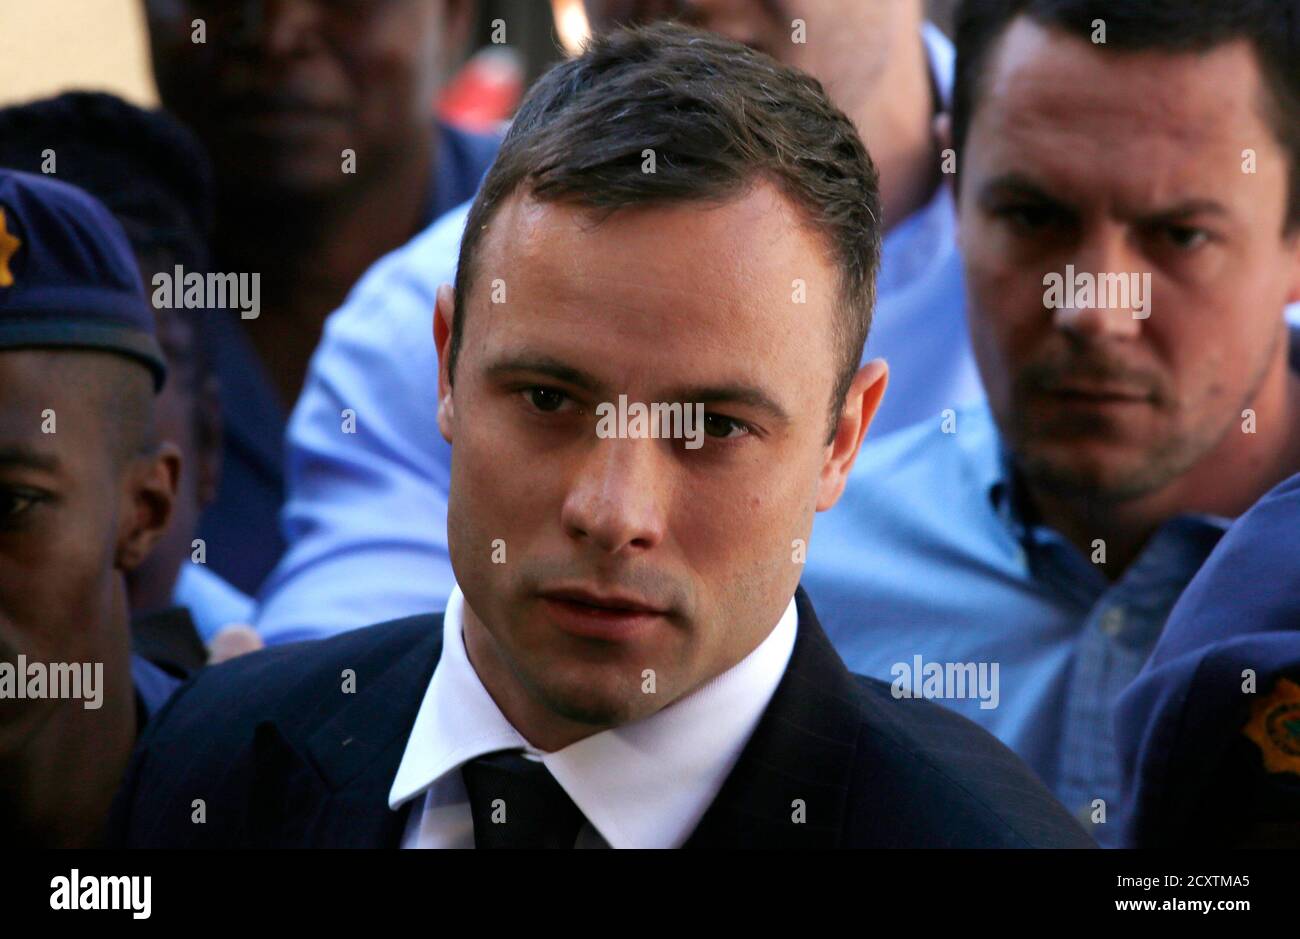 South African Olympic and Paralympic sprinter Oscar Pistorius arrives at the North Gauteng High Court in Pretoria October 21, 2014. Pistorius arrived at the court on Tuesday to be sentenced for killing his girlfriend, Reeva Steenkamp, closing one of the most sensational trials in South African history and one that may yet fuel controversy about race and money in its justice system. REUTERS/Mike Hutchings (SOUTH AFRICA - Tags: SPORT CRIME LAW ATHLETICS HEADSHOT) Stock Photo